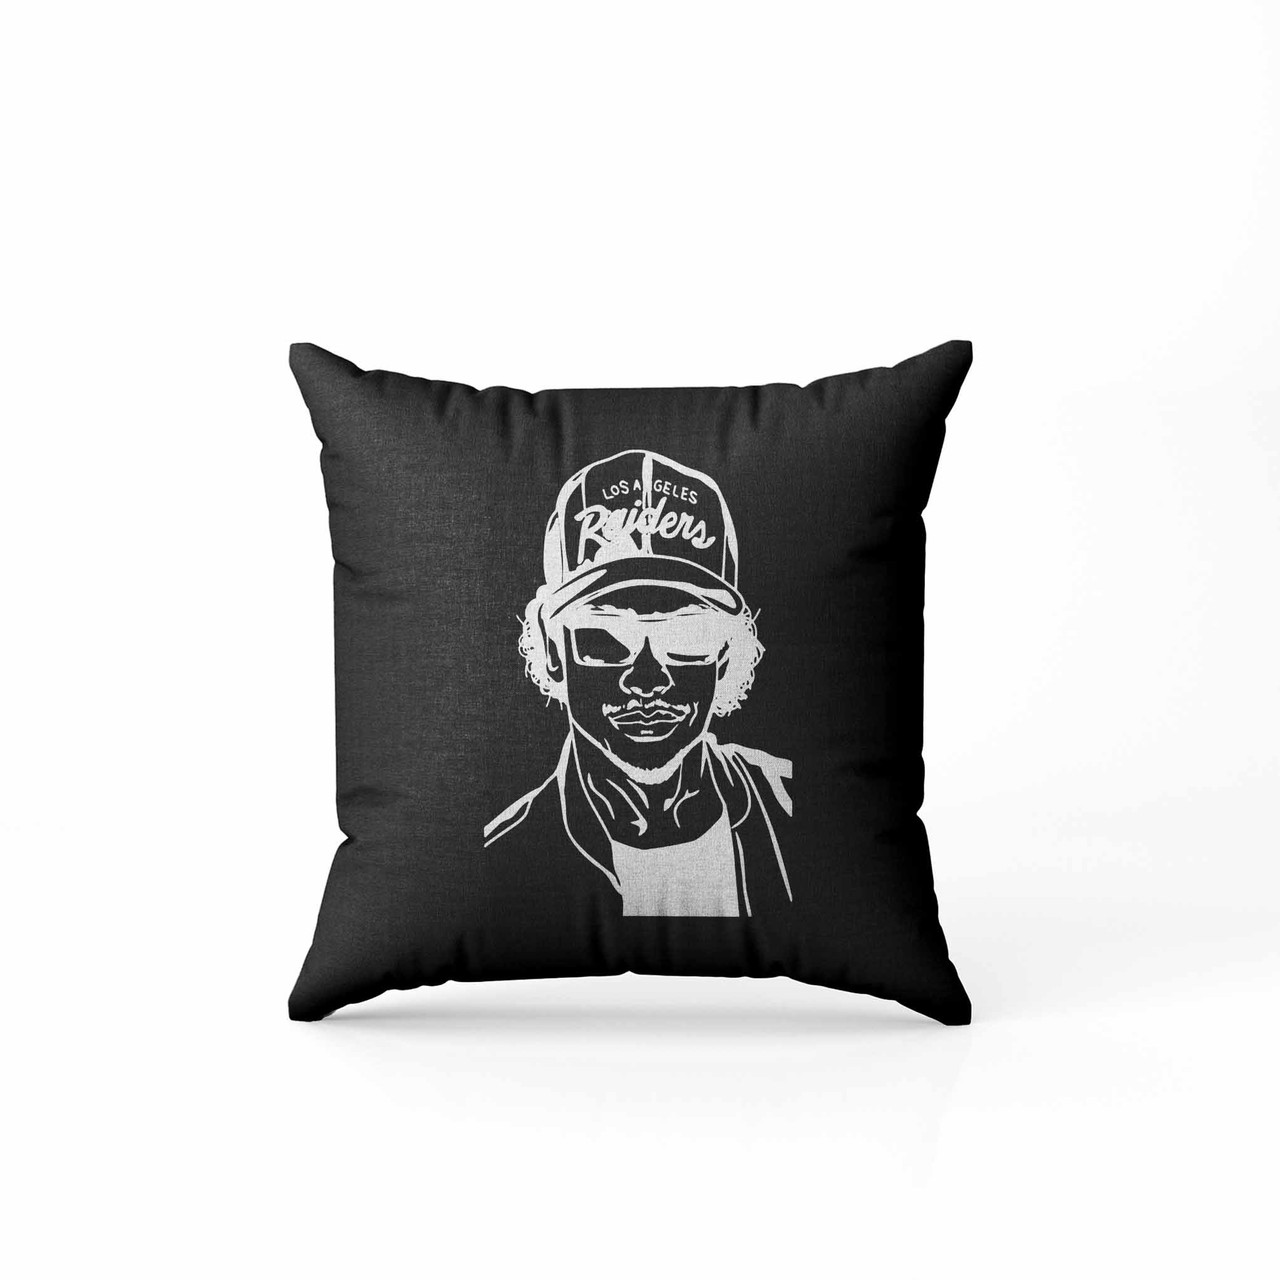 Eazy E Nwa Raiders Hat Pillow Case Cover